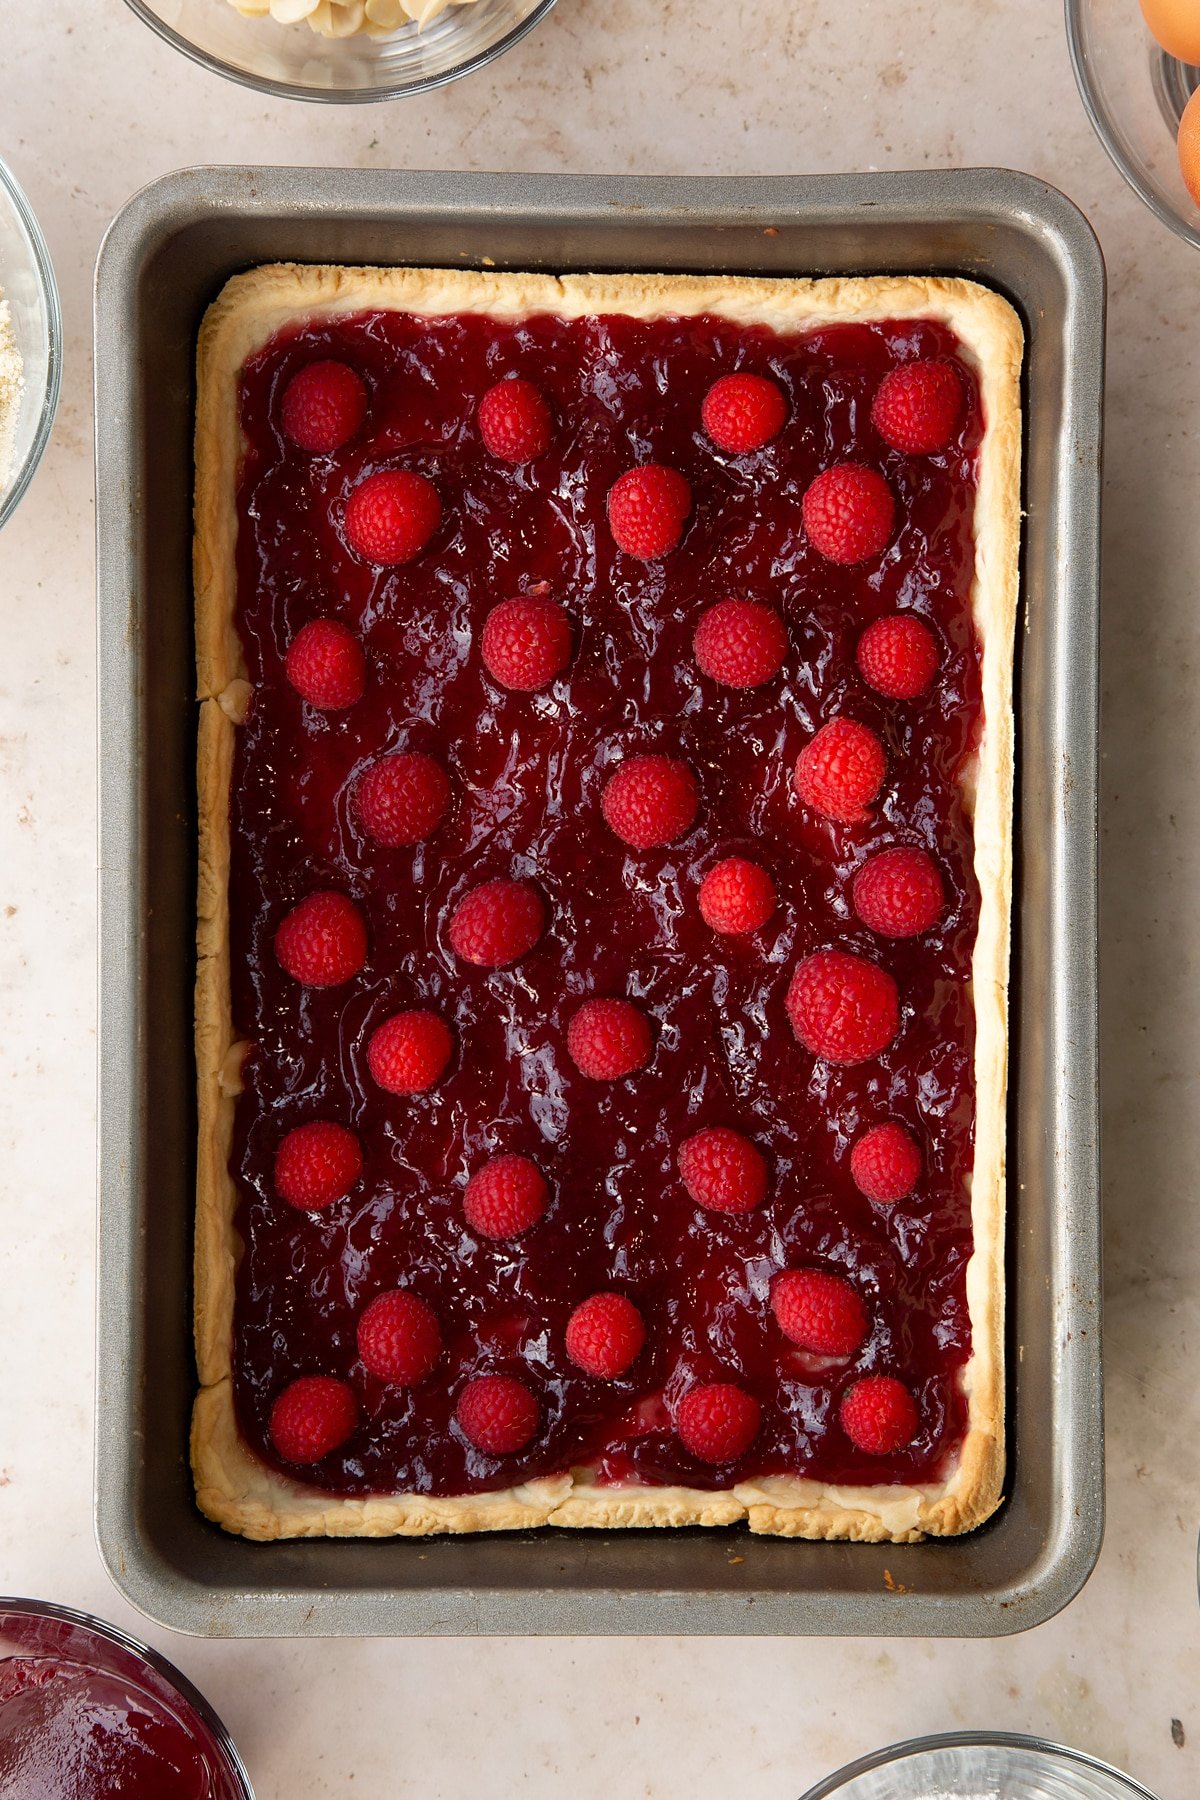 Part-cooked pastry in a rectangular tin. It has been spread with jam and dotted with raspberries.